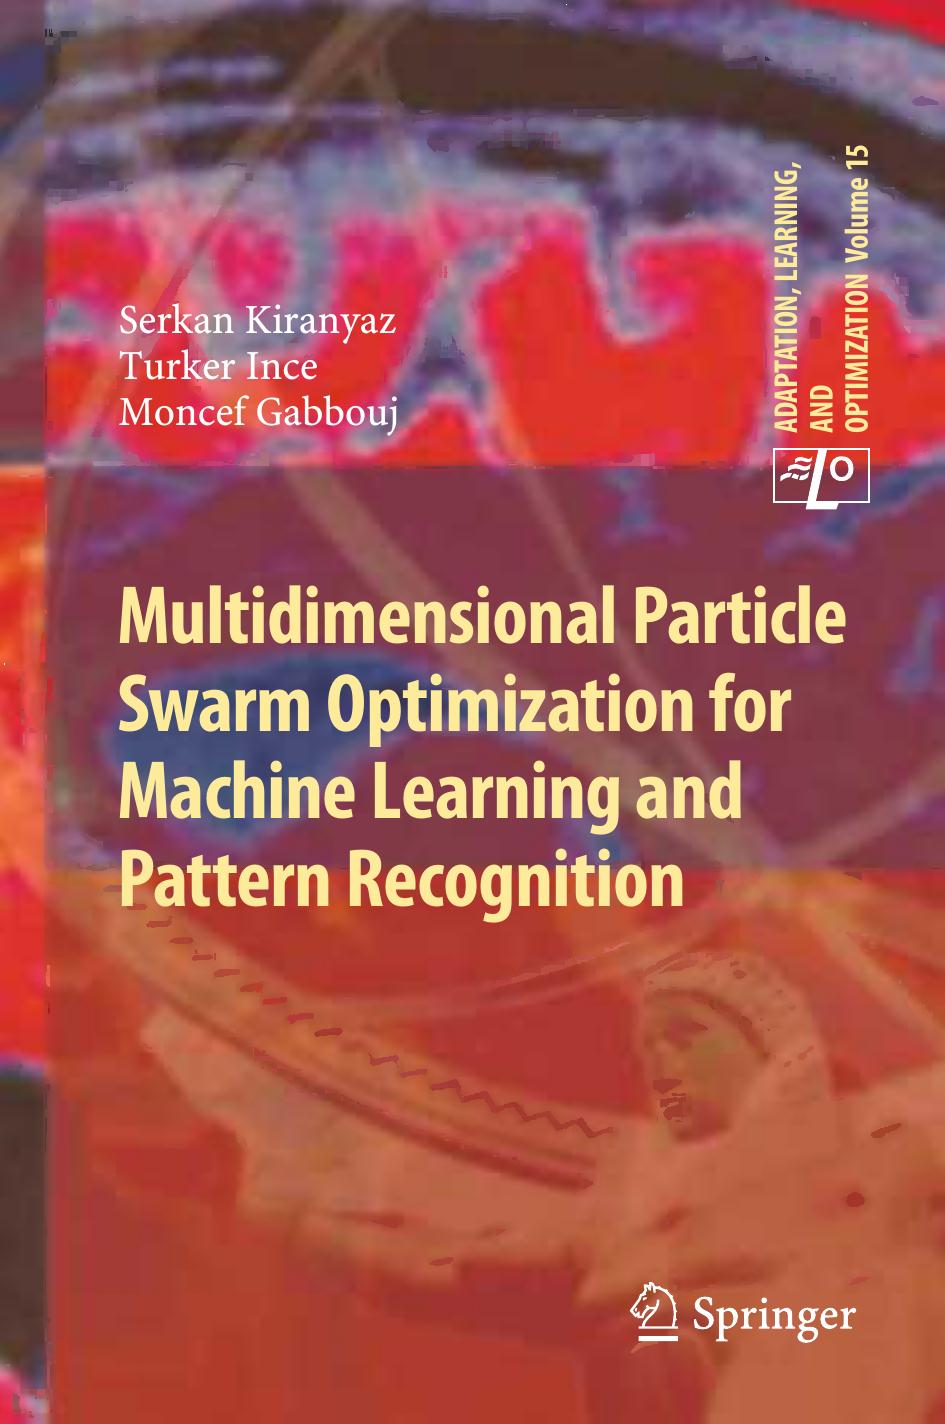 Multidimensional Particle Swarm Optimization for Machine Learning and Pattern Recognition ( PDFDrive.com )